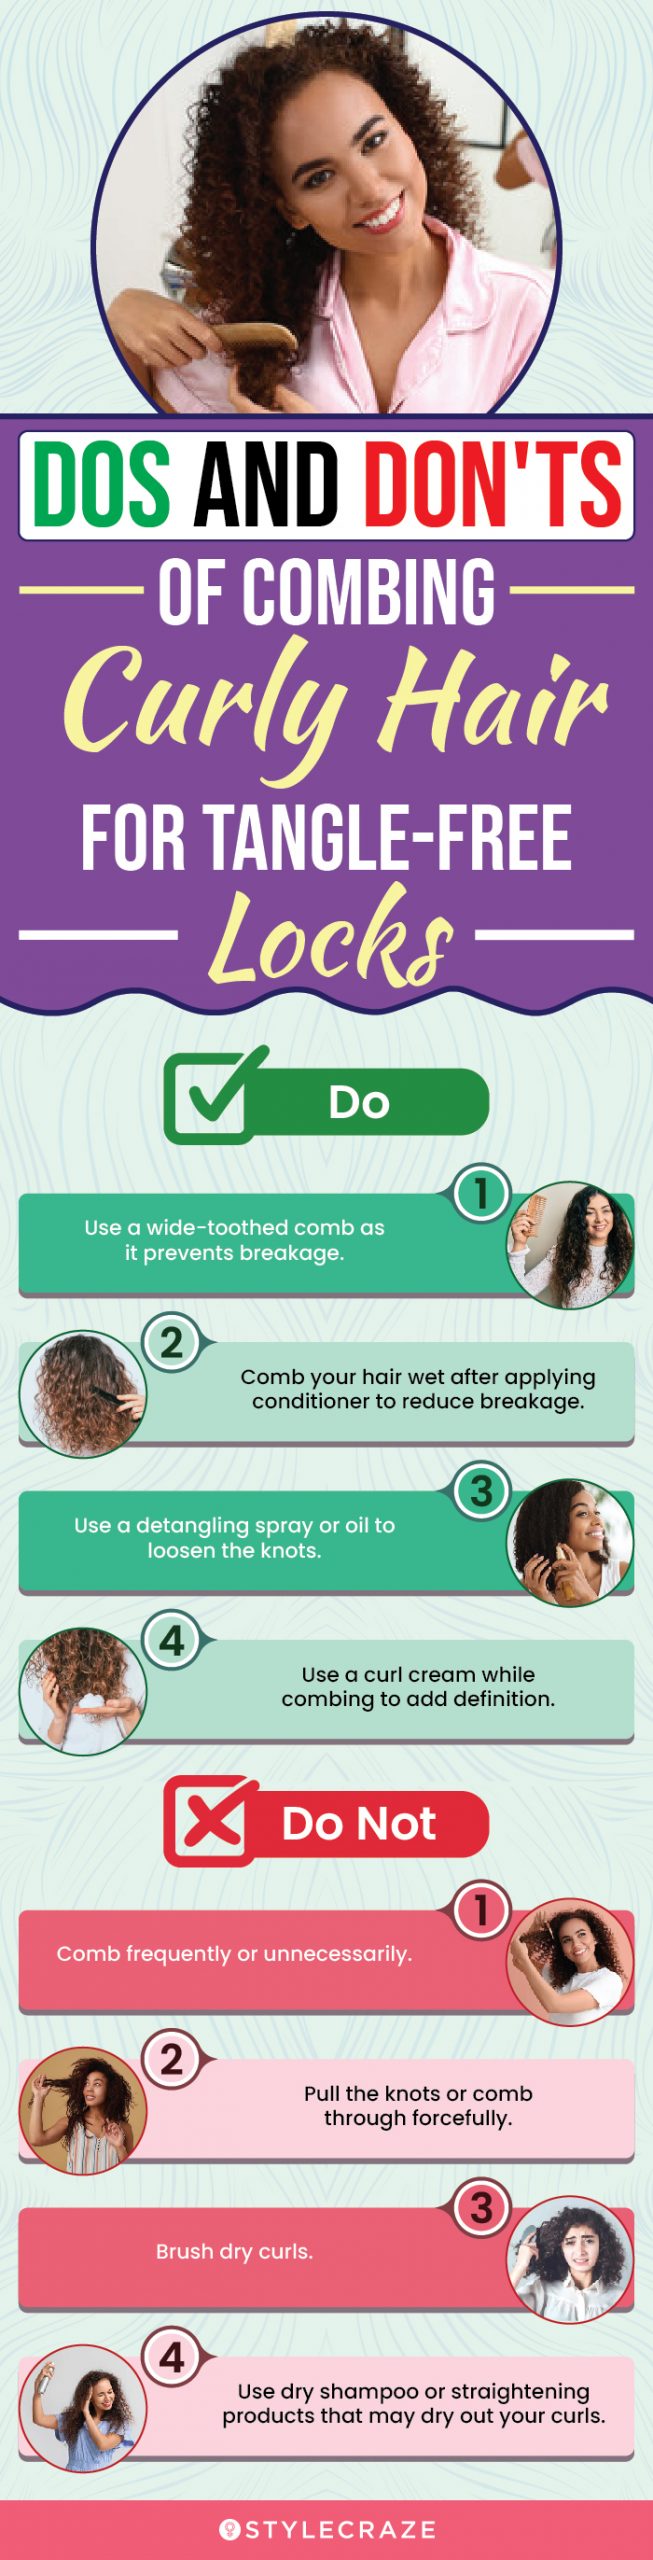 Dos And Don'ts Of Combing Curly Hair For Tangle-Free Locks (infographic)